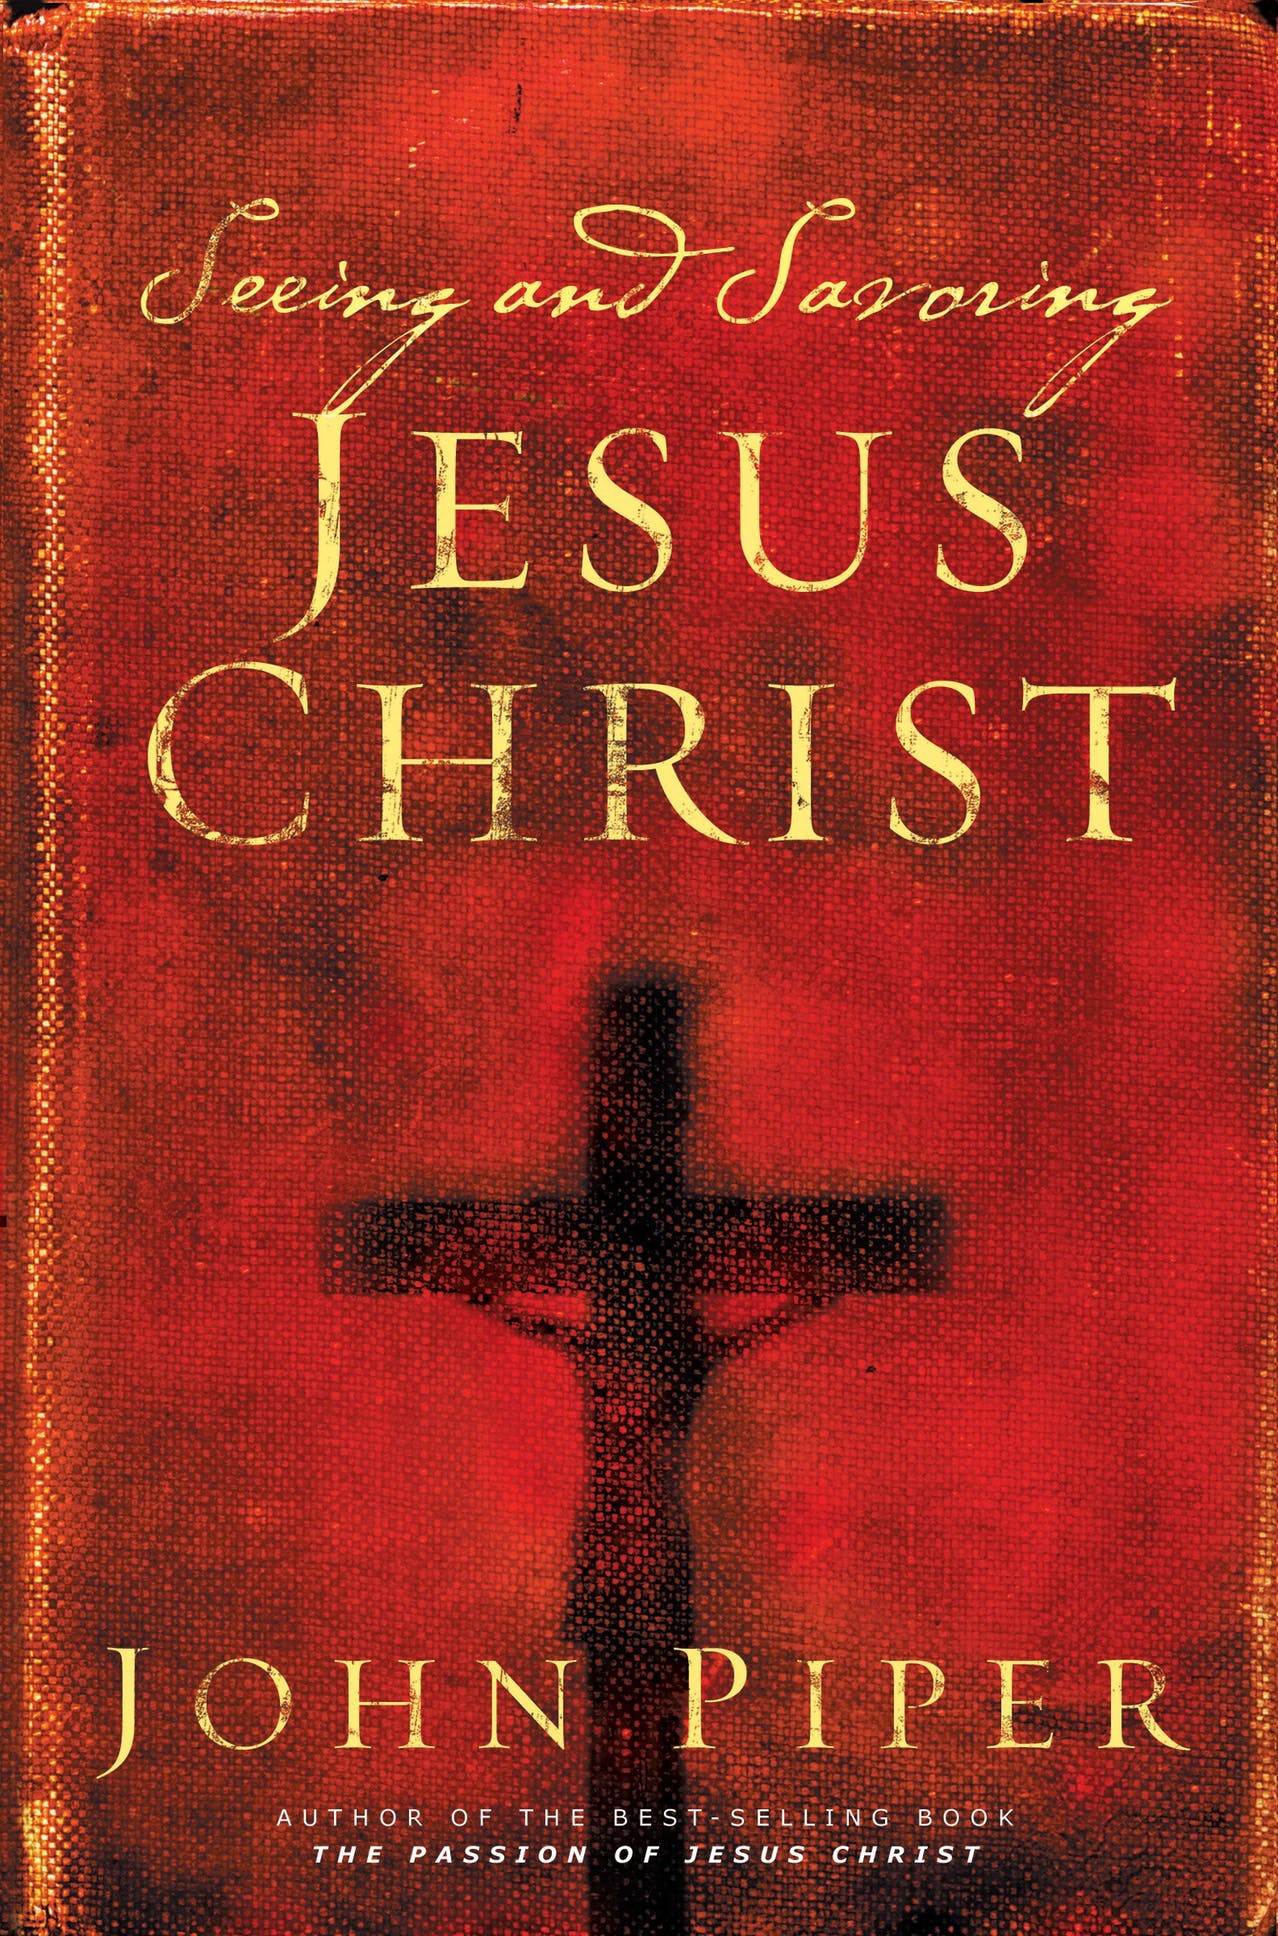 You are currently viewing Book of the Month for March: Seeing and Savoring Jesus Christ